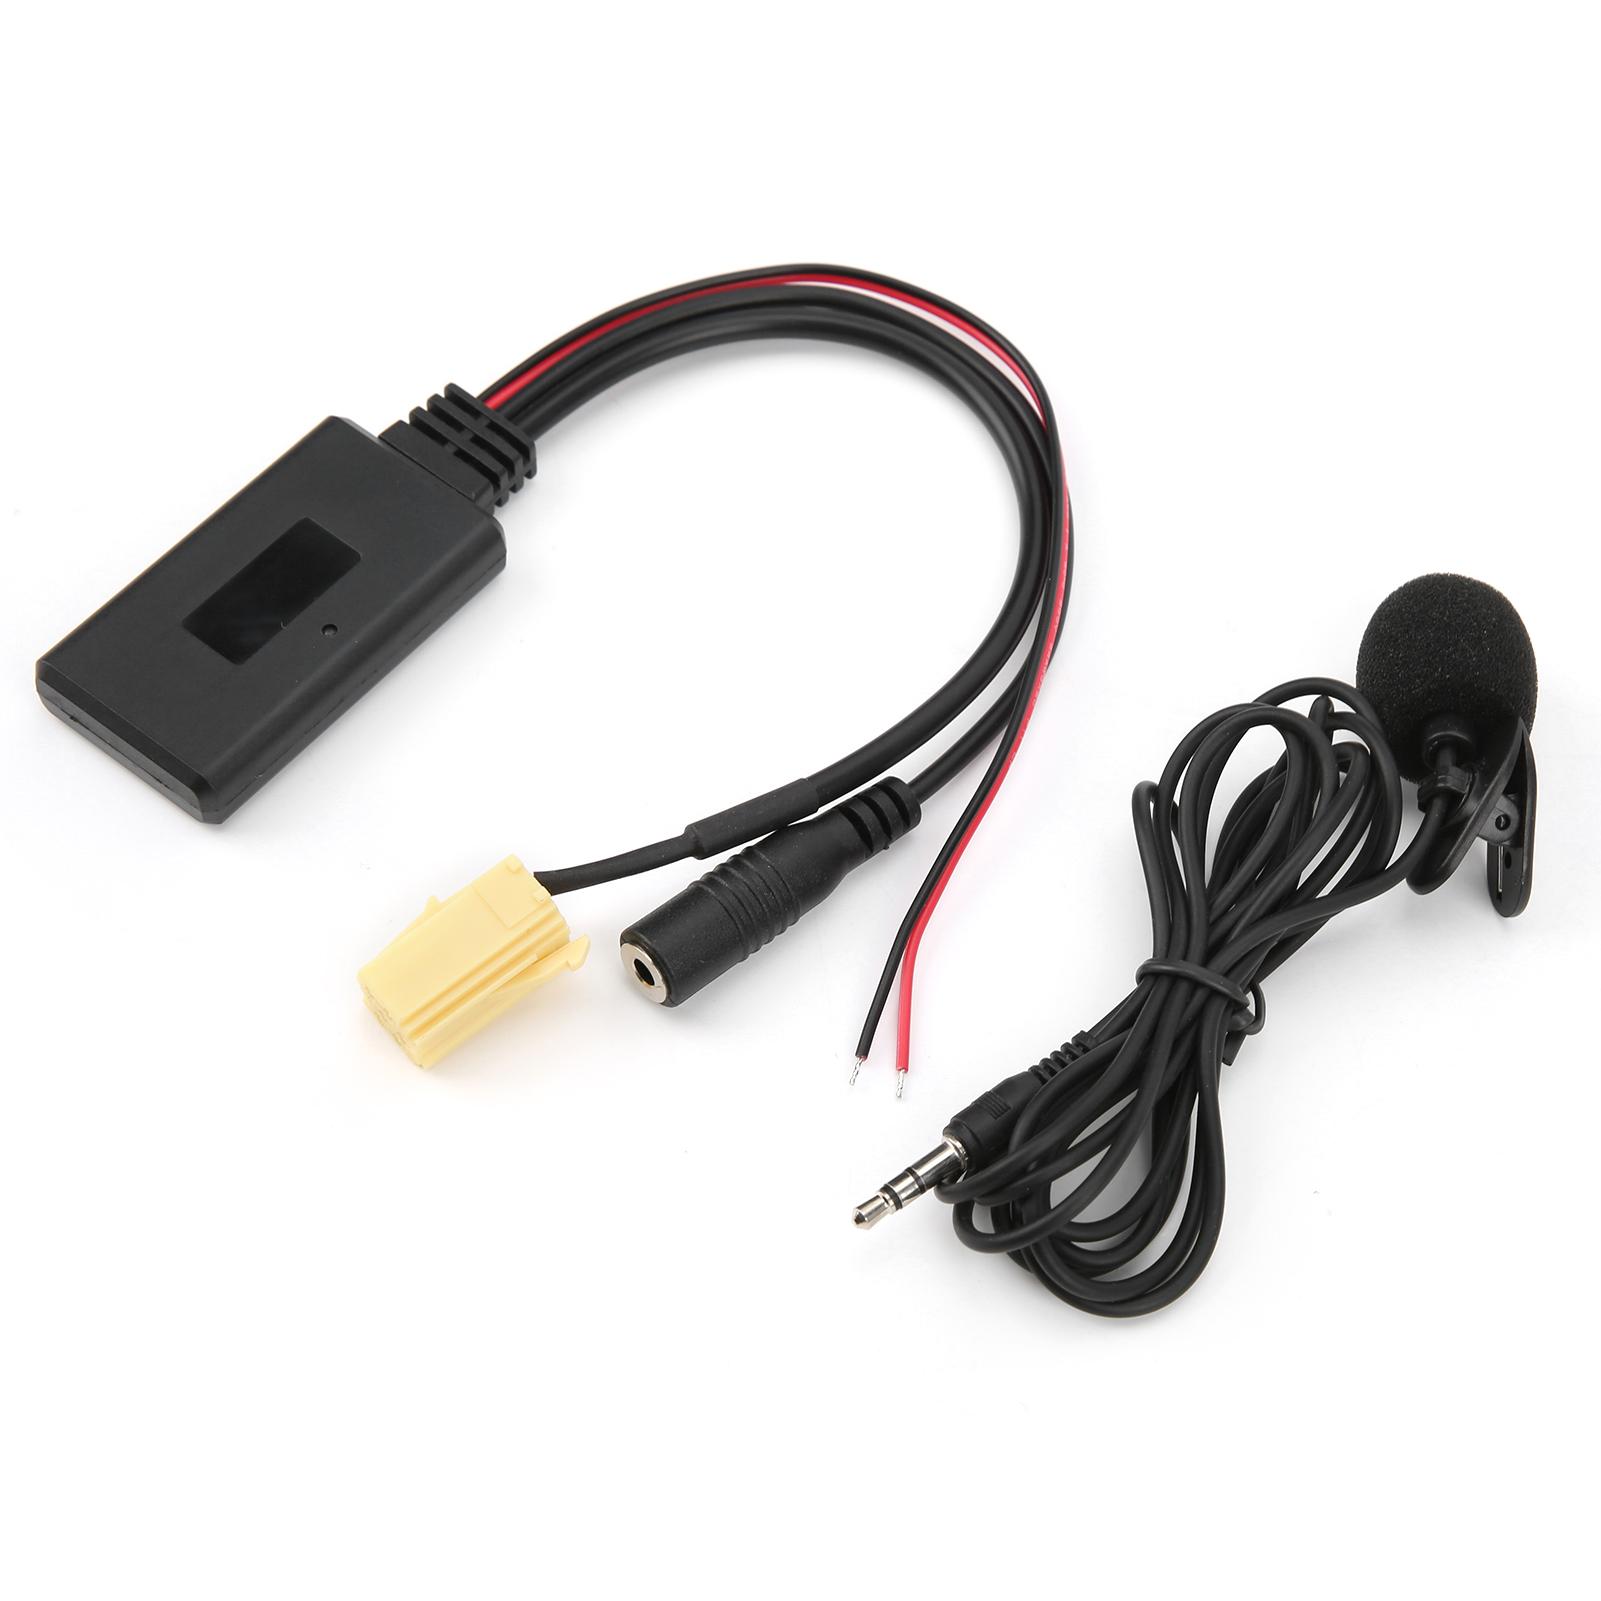 Fiat Audio Bluetooth Module Adapter with Microphone 